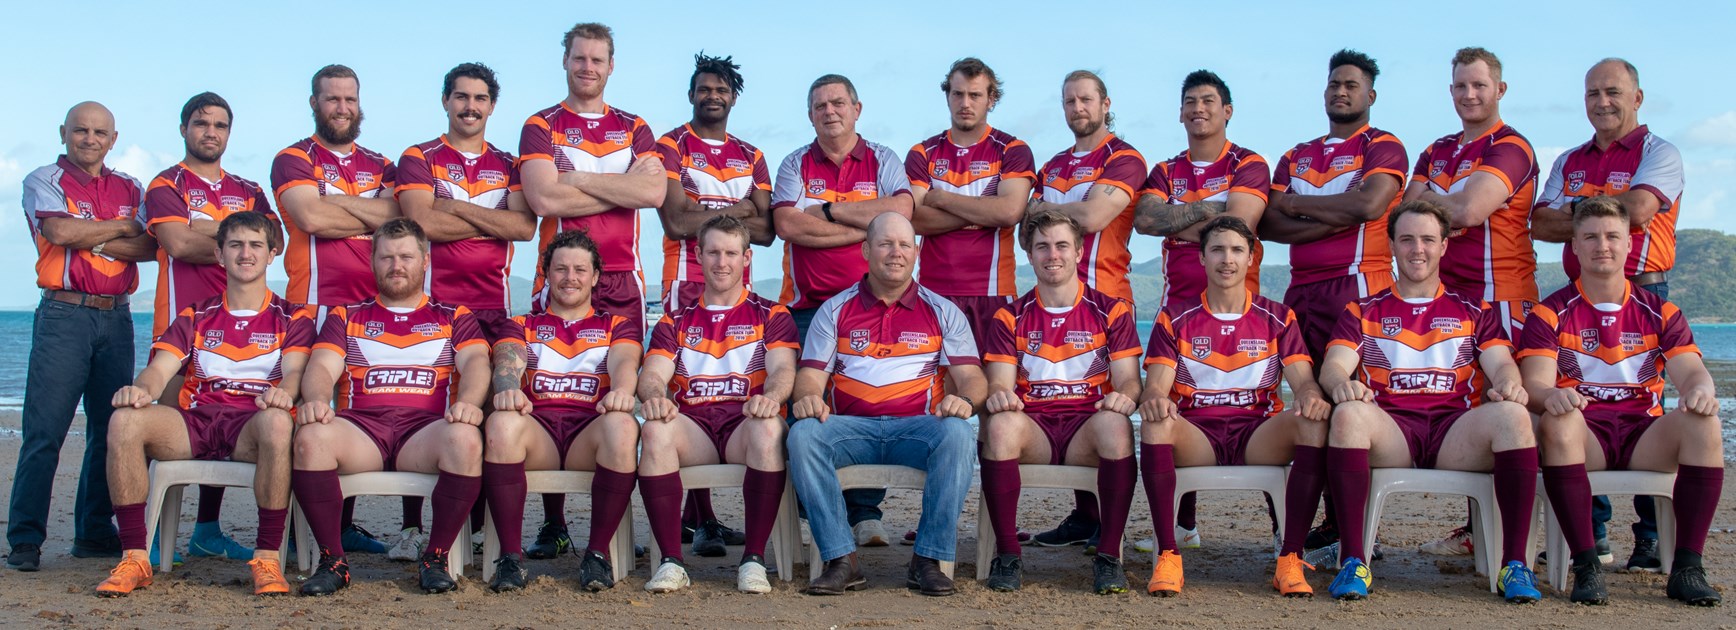 Queensland Outback teams announced